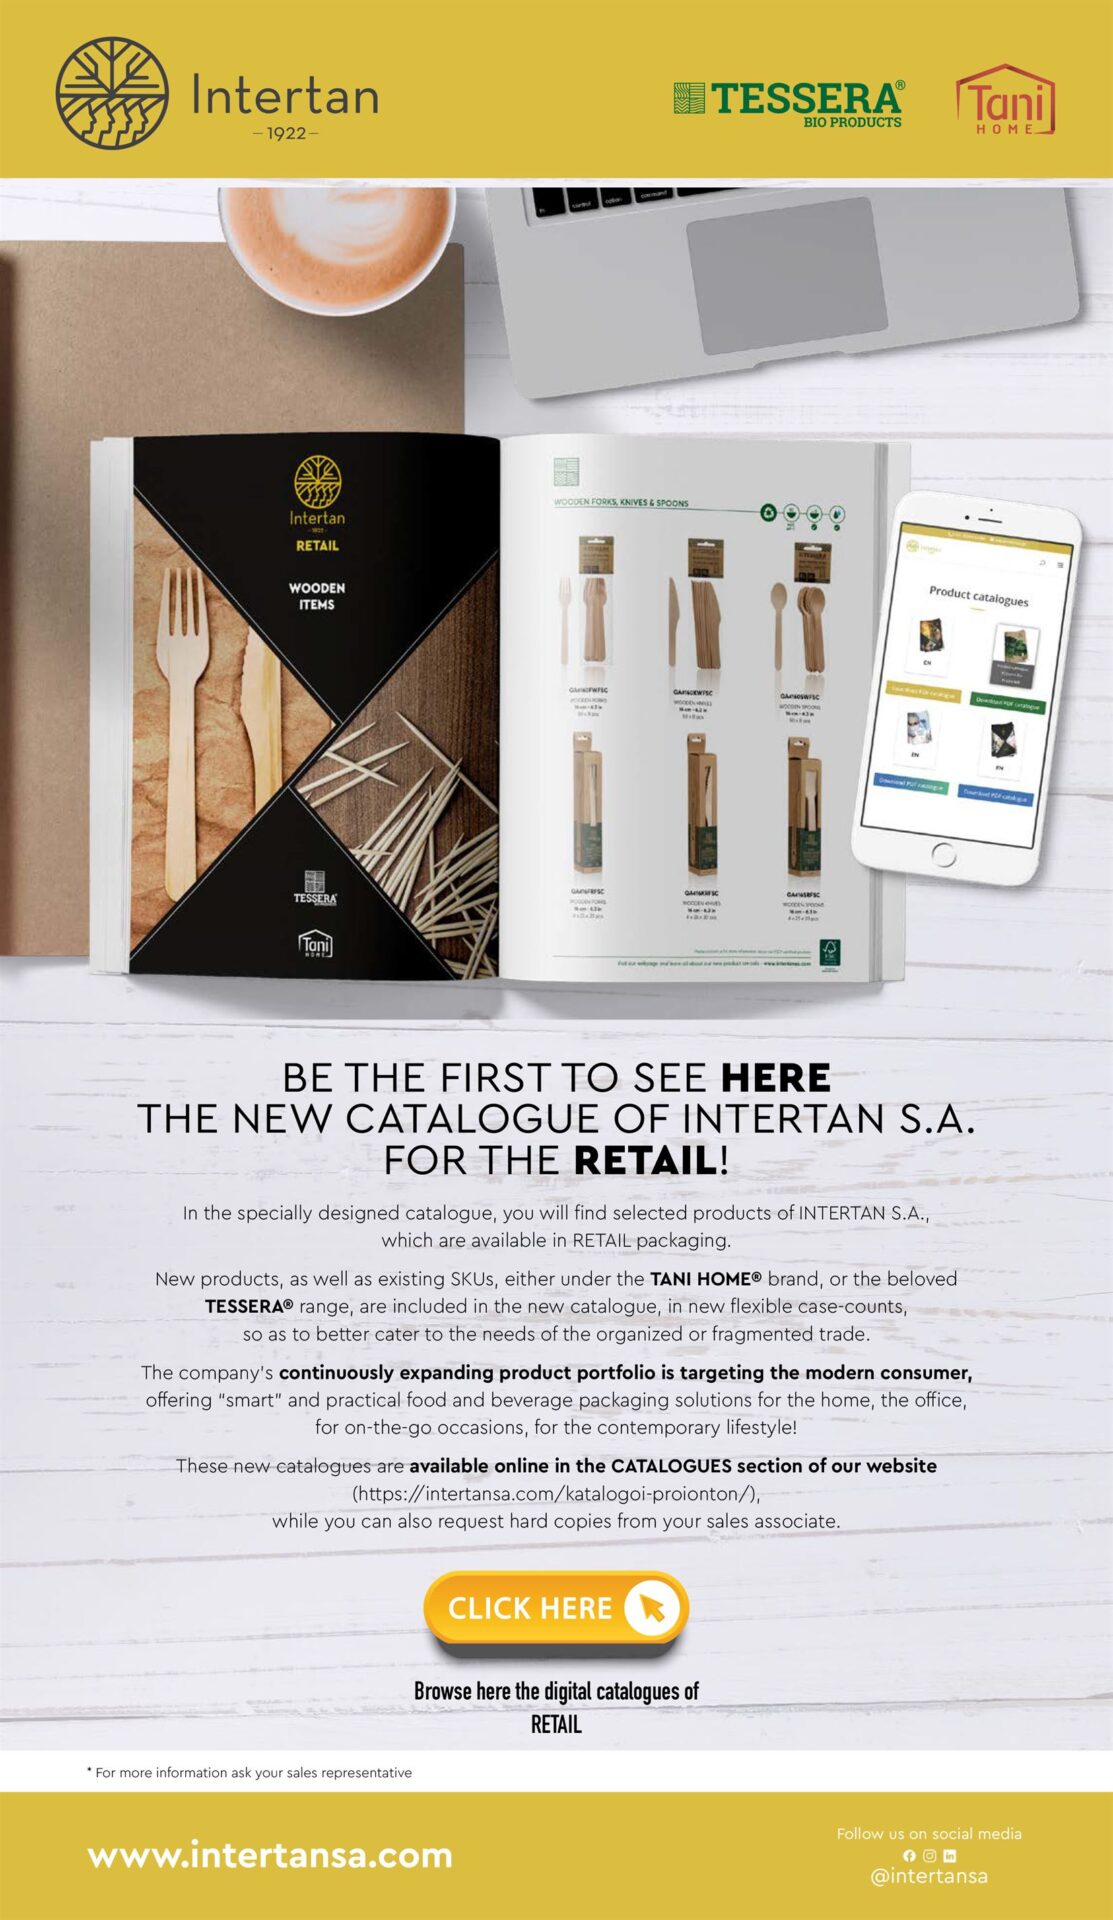 New Retail Products’ Catalogue Newsletter | Intertan S.A.